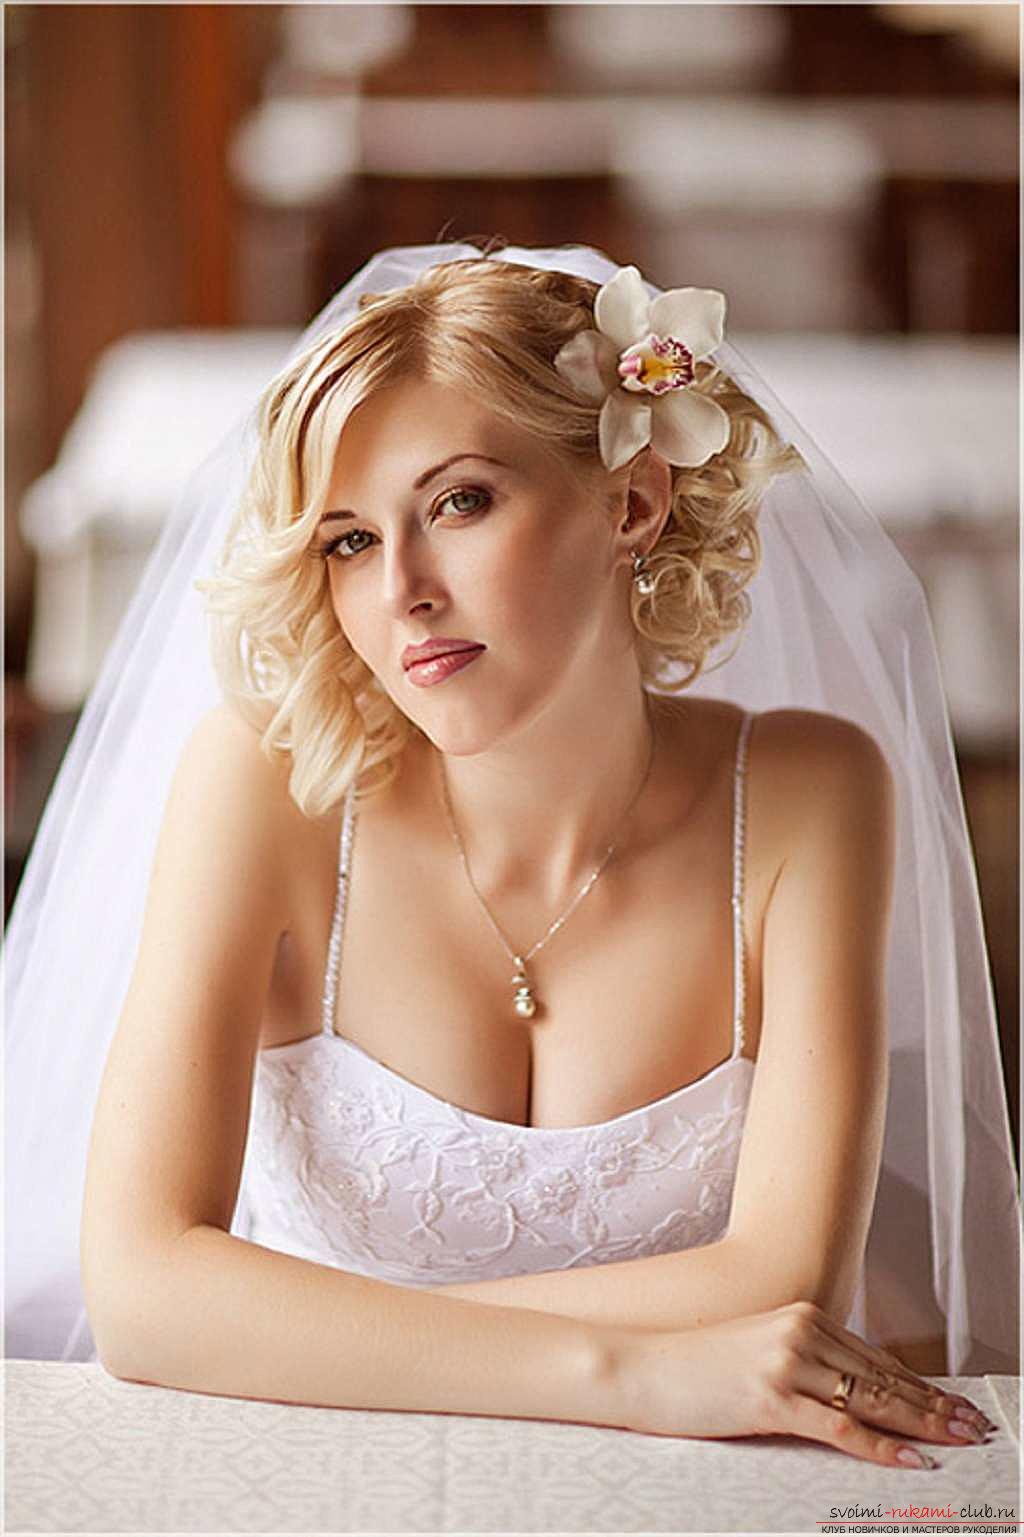 Hairstyles for the bride with a long veil. Photo # 2